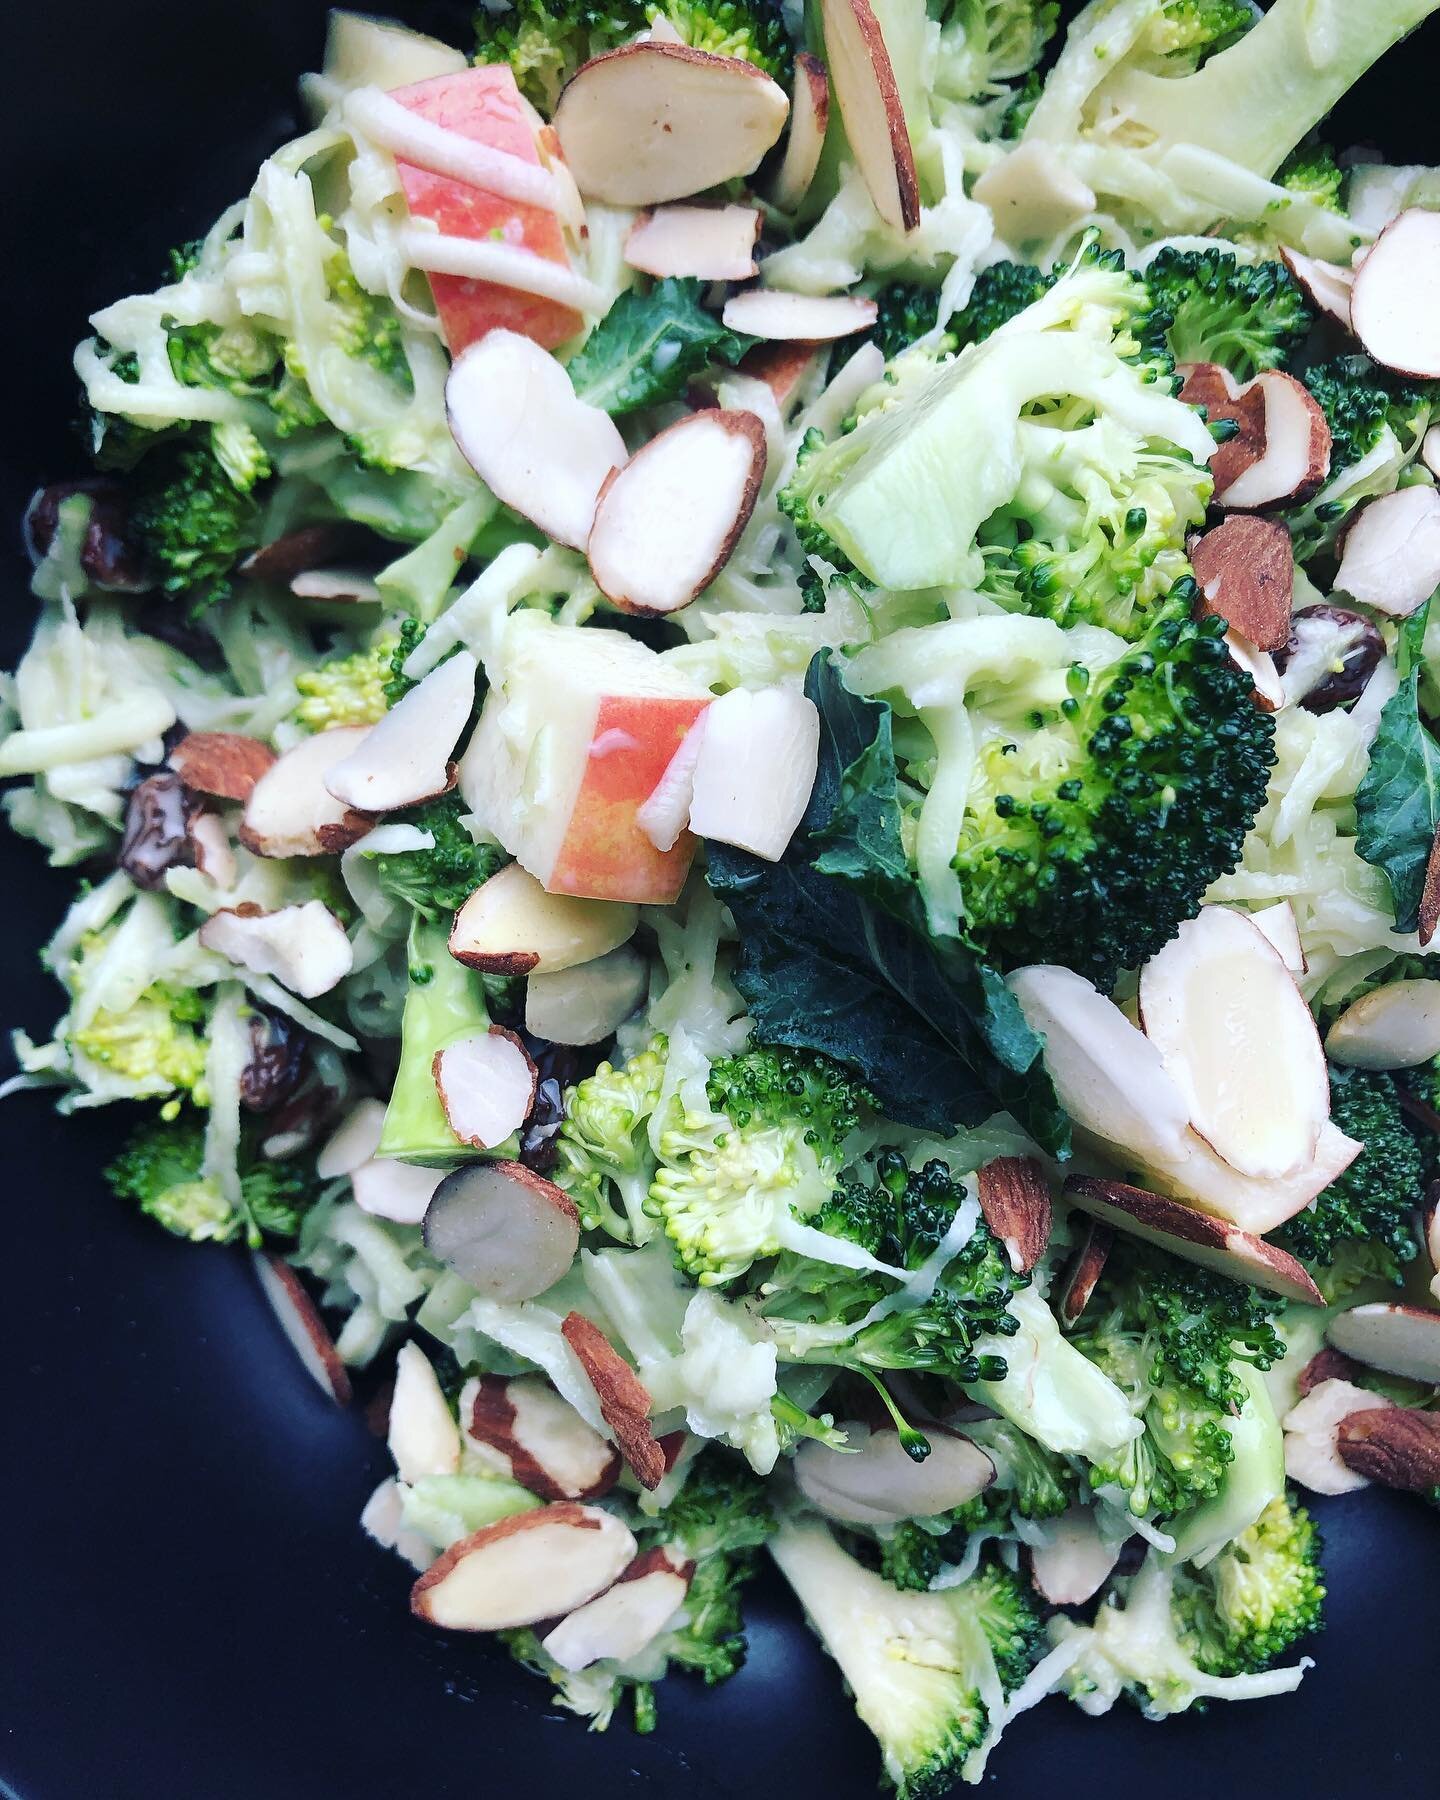 This broccoli salad hits the spot 🤩
Broccoli + grated stems 
Crisp apples 
plumped raisins 
Slivered almonds 
Creamy, Maple sweetened dressing 
👉🏼To aid in digestion drop your raw broccoli in a pot of boiling water for 10-15 seconds. Just until it